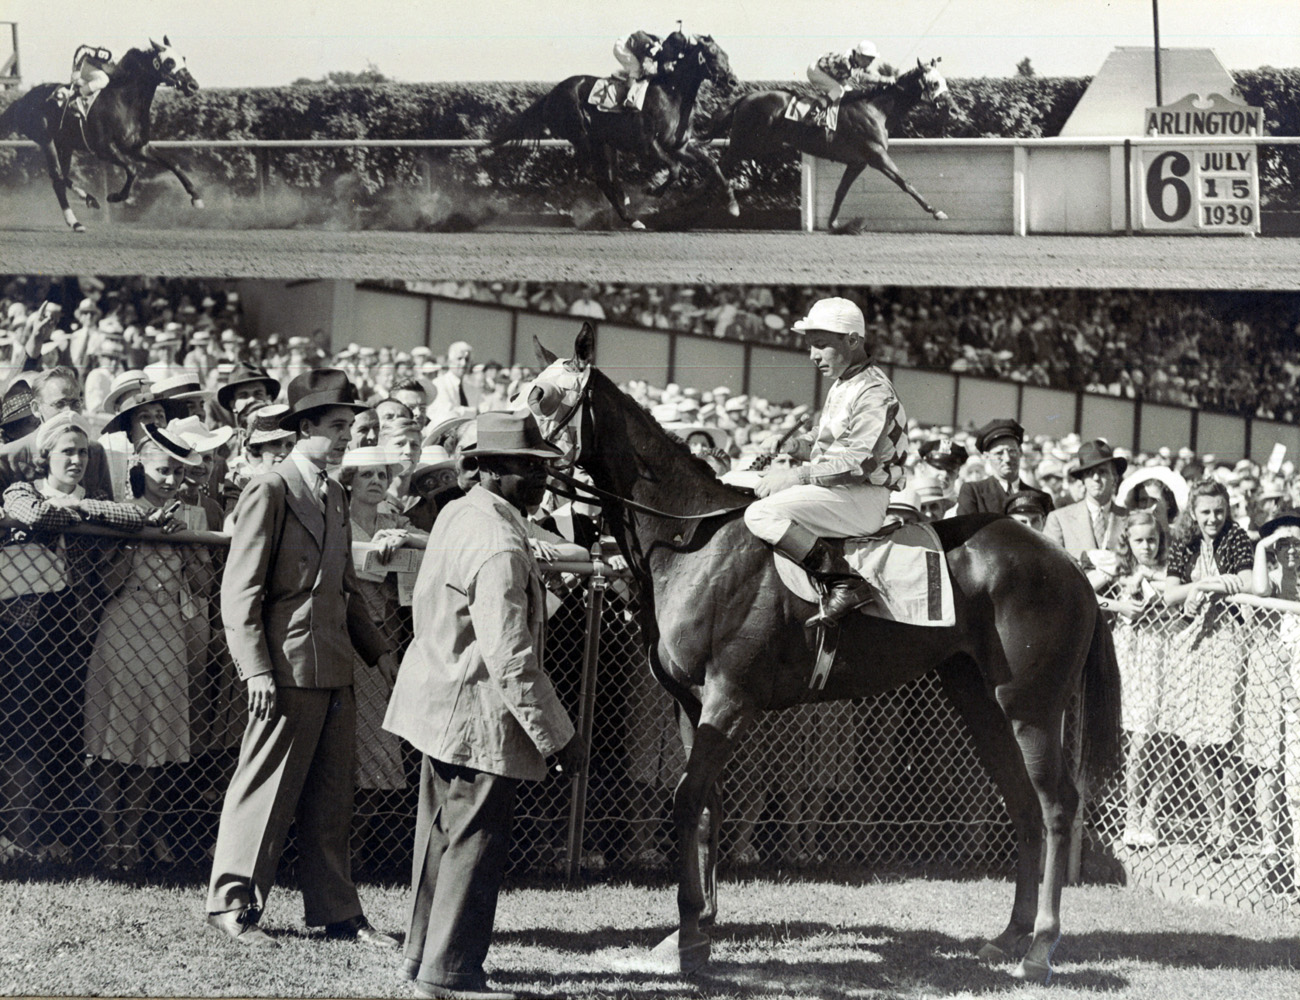 Win composite from the 1939 Arlington Lassie, won by Raymond Workman and Now What (Carl Schultz Turf Photo/Museum Collection)